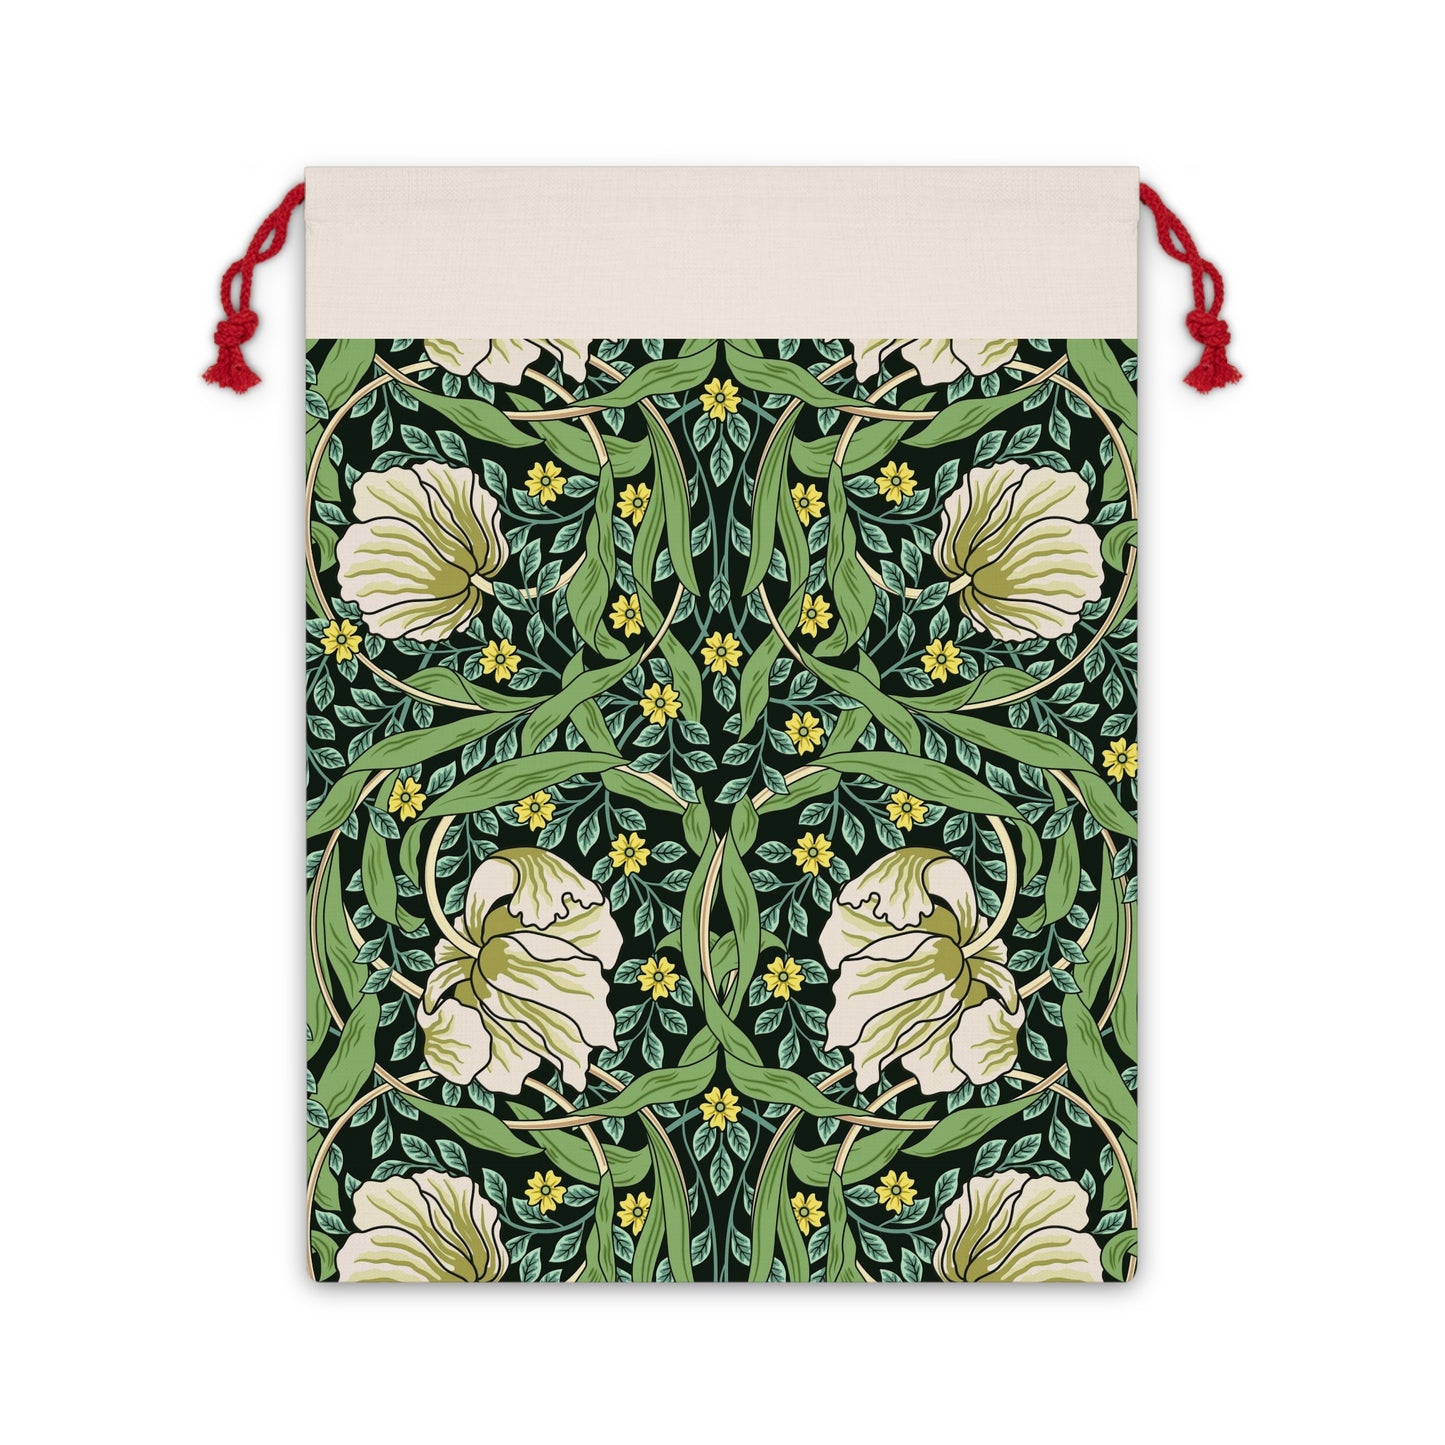 william-morris-co-christmas-linen-drawstring-bag-pimpernel-collection-green-2